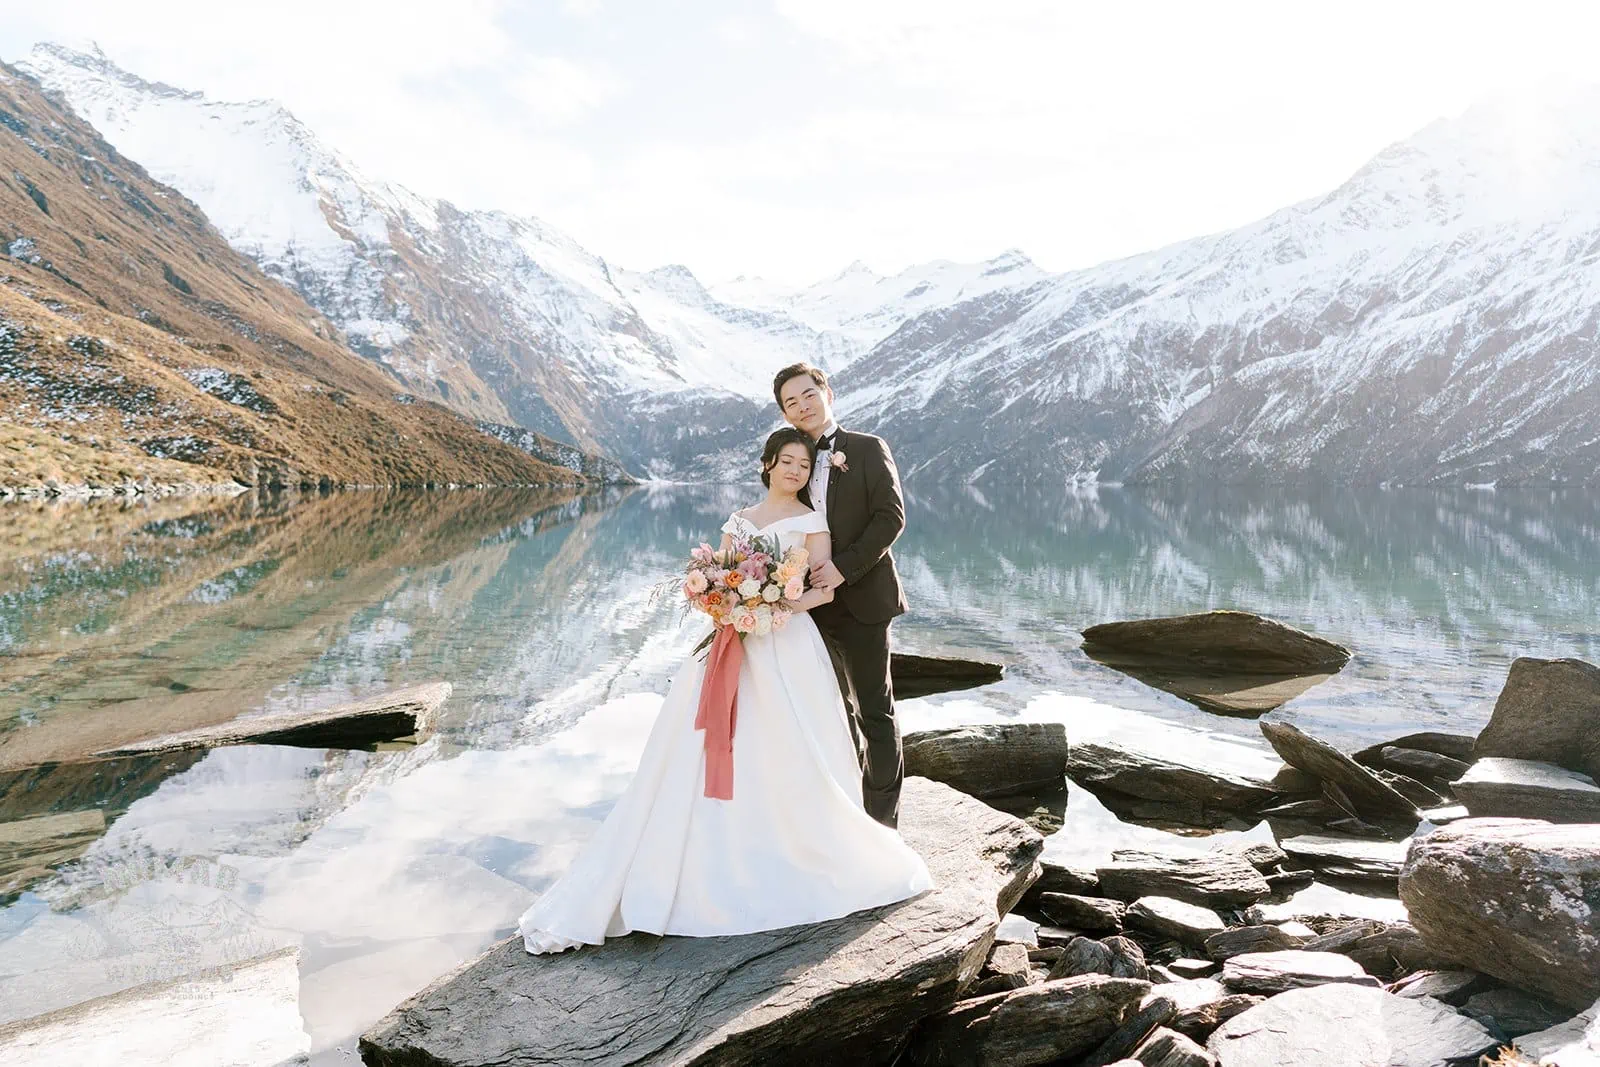 Queenstown New Zealand Elopement Wedding Photographer - Bo and Junyi, a bride and groom, having a Heli Pre Wedding Shoot with 4 Landings in New Zealand, standing on rocks in front of a lake.